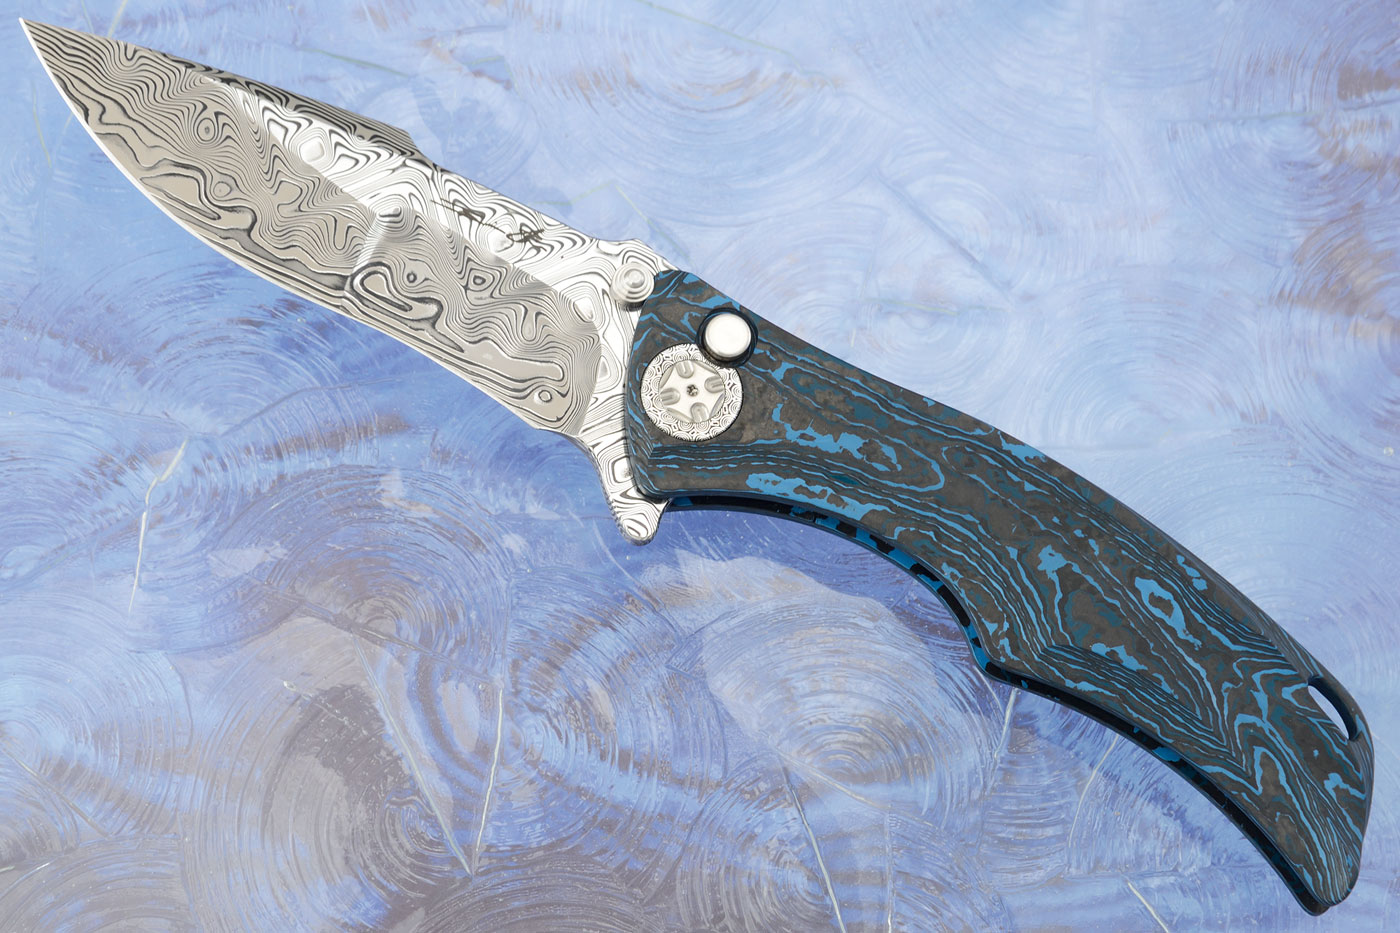 Tighe Down with Integral Arctic Storm FatCarbon and Damasteel